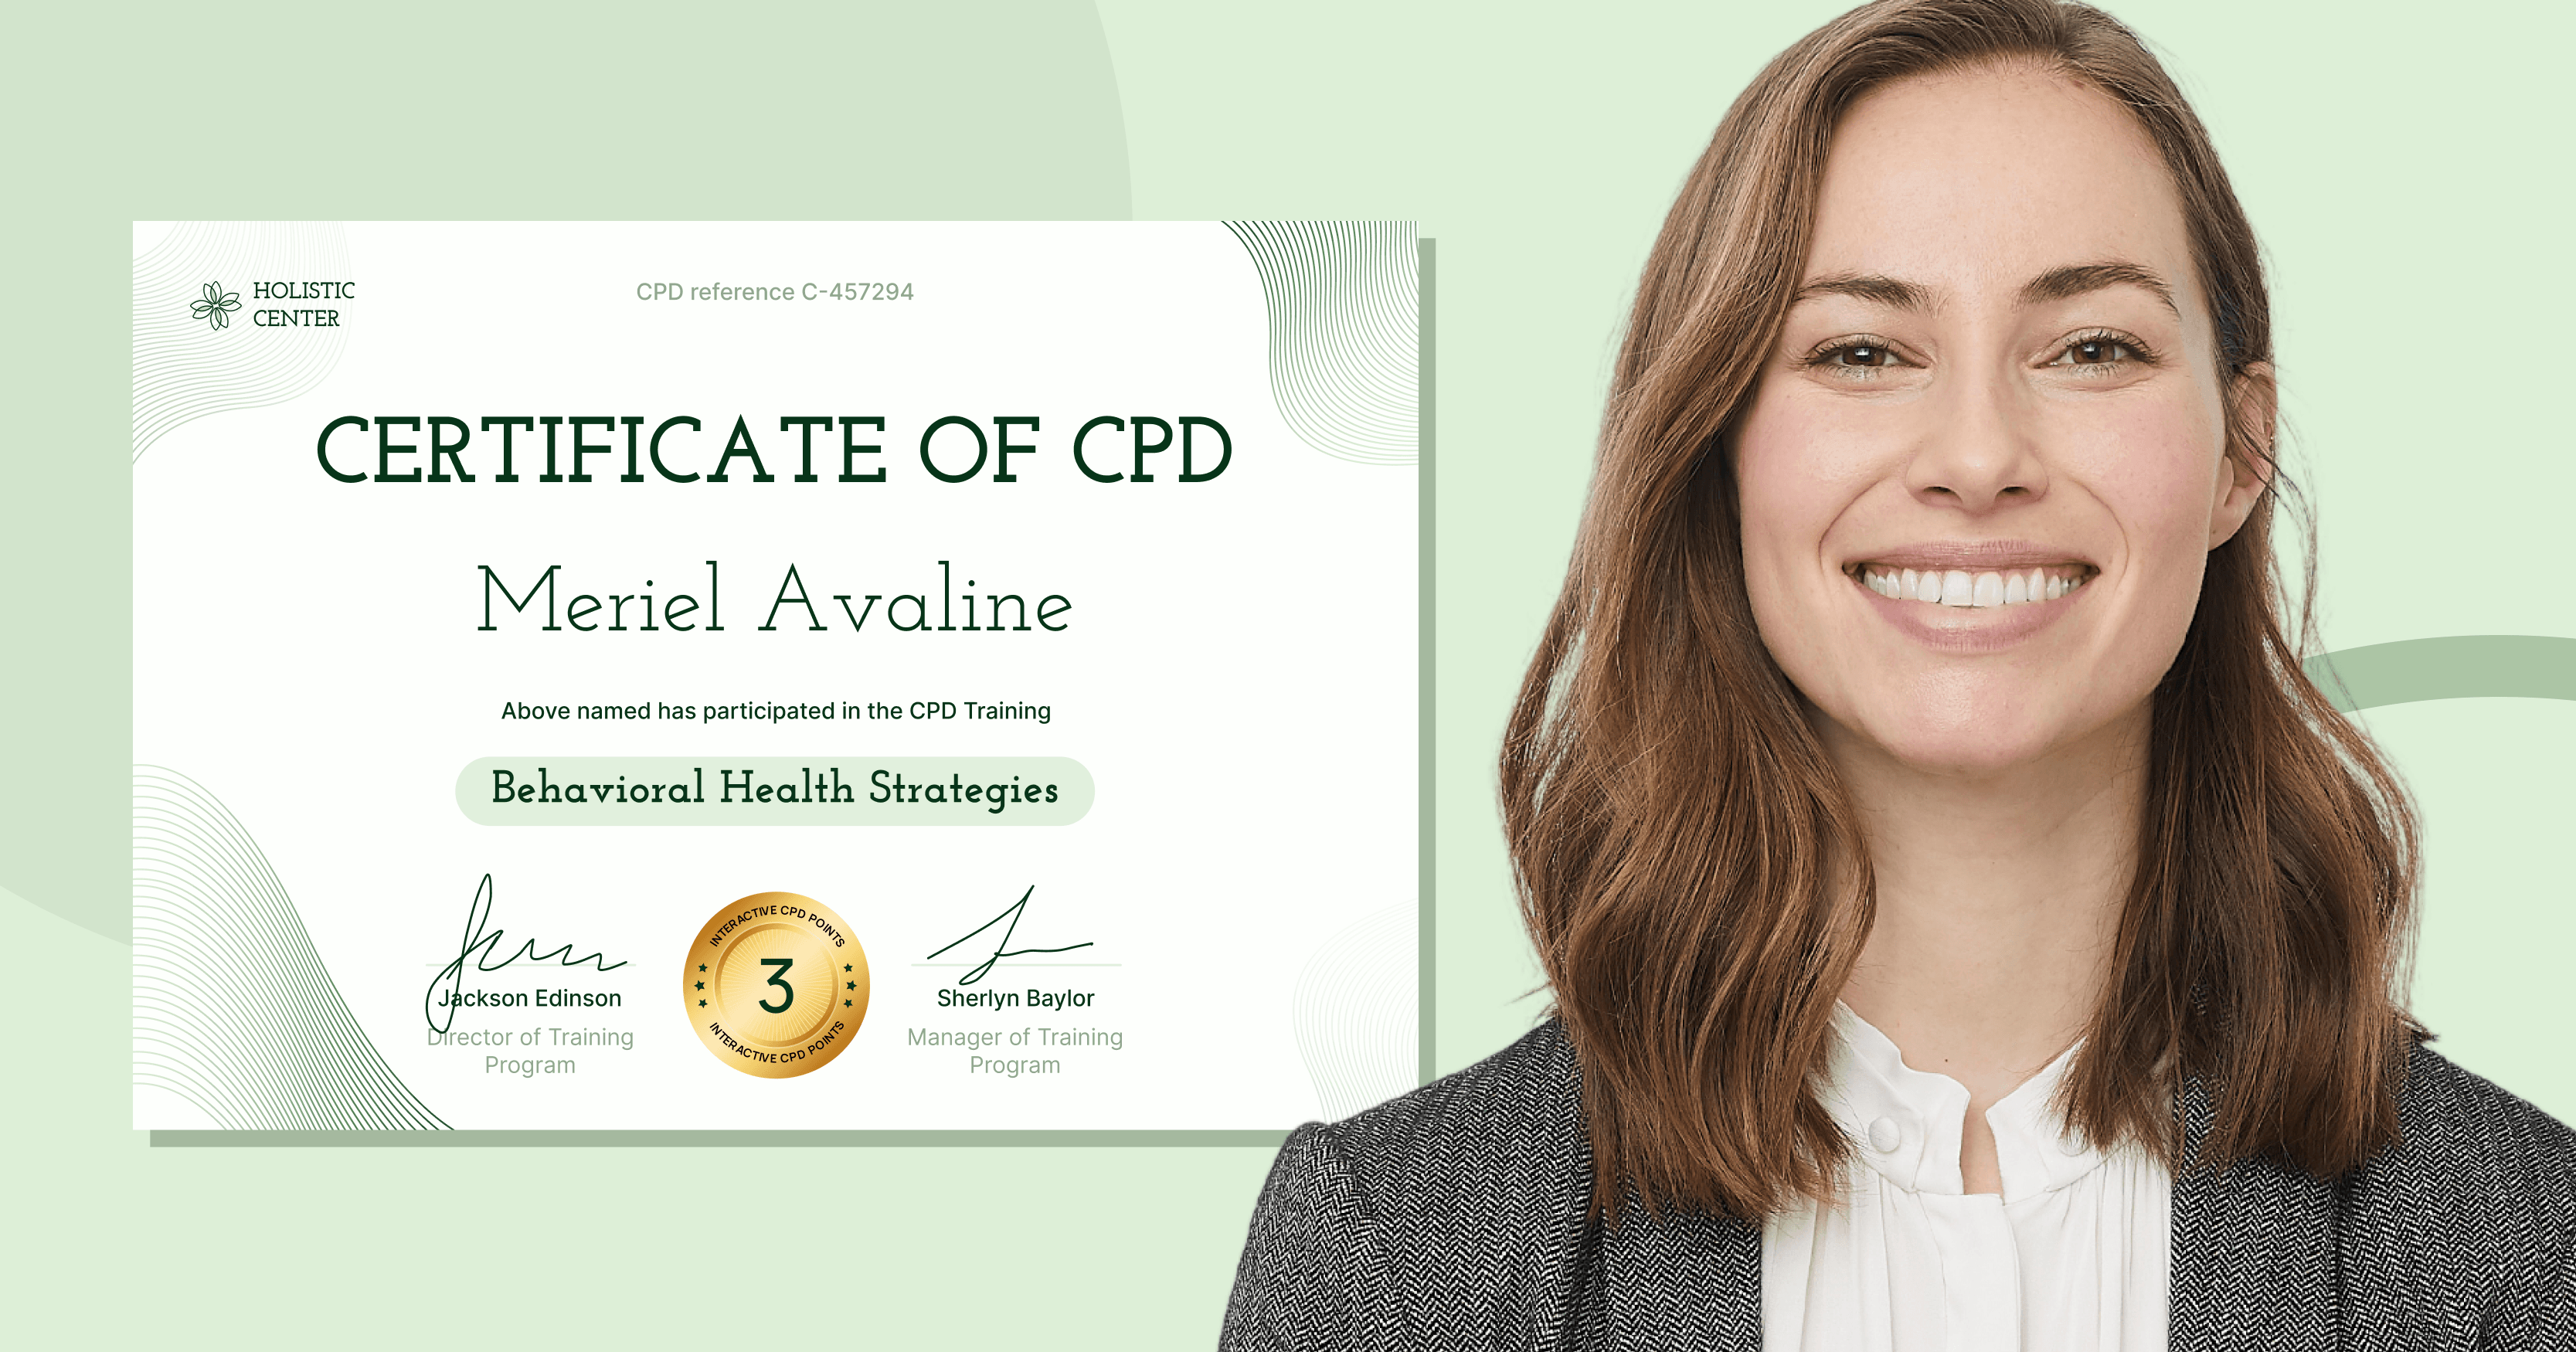 15 CPD Certificate Templates (Free to Download!) cover image